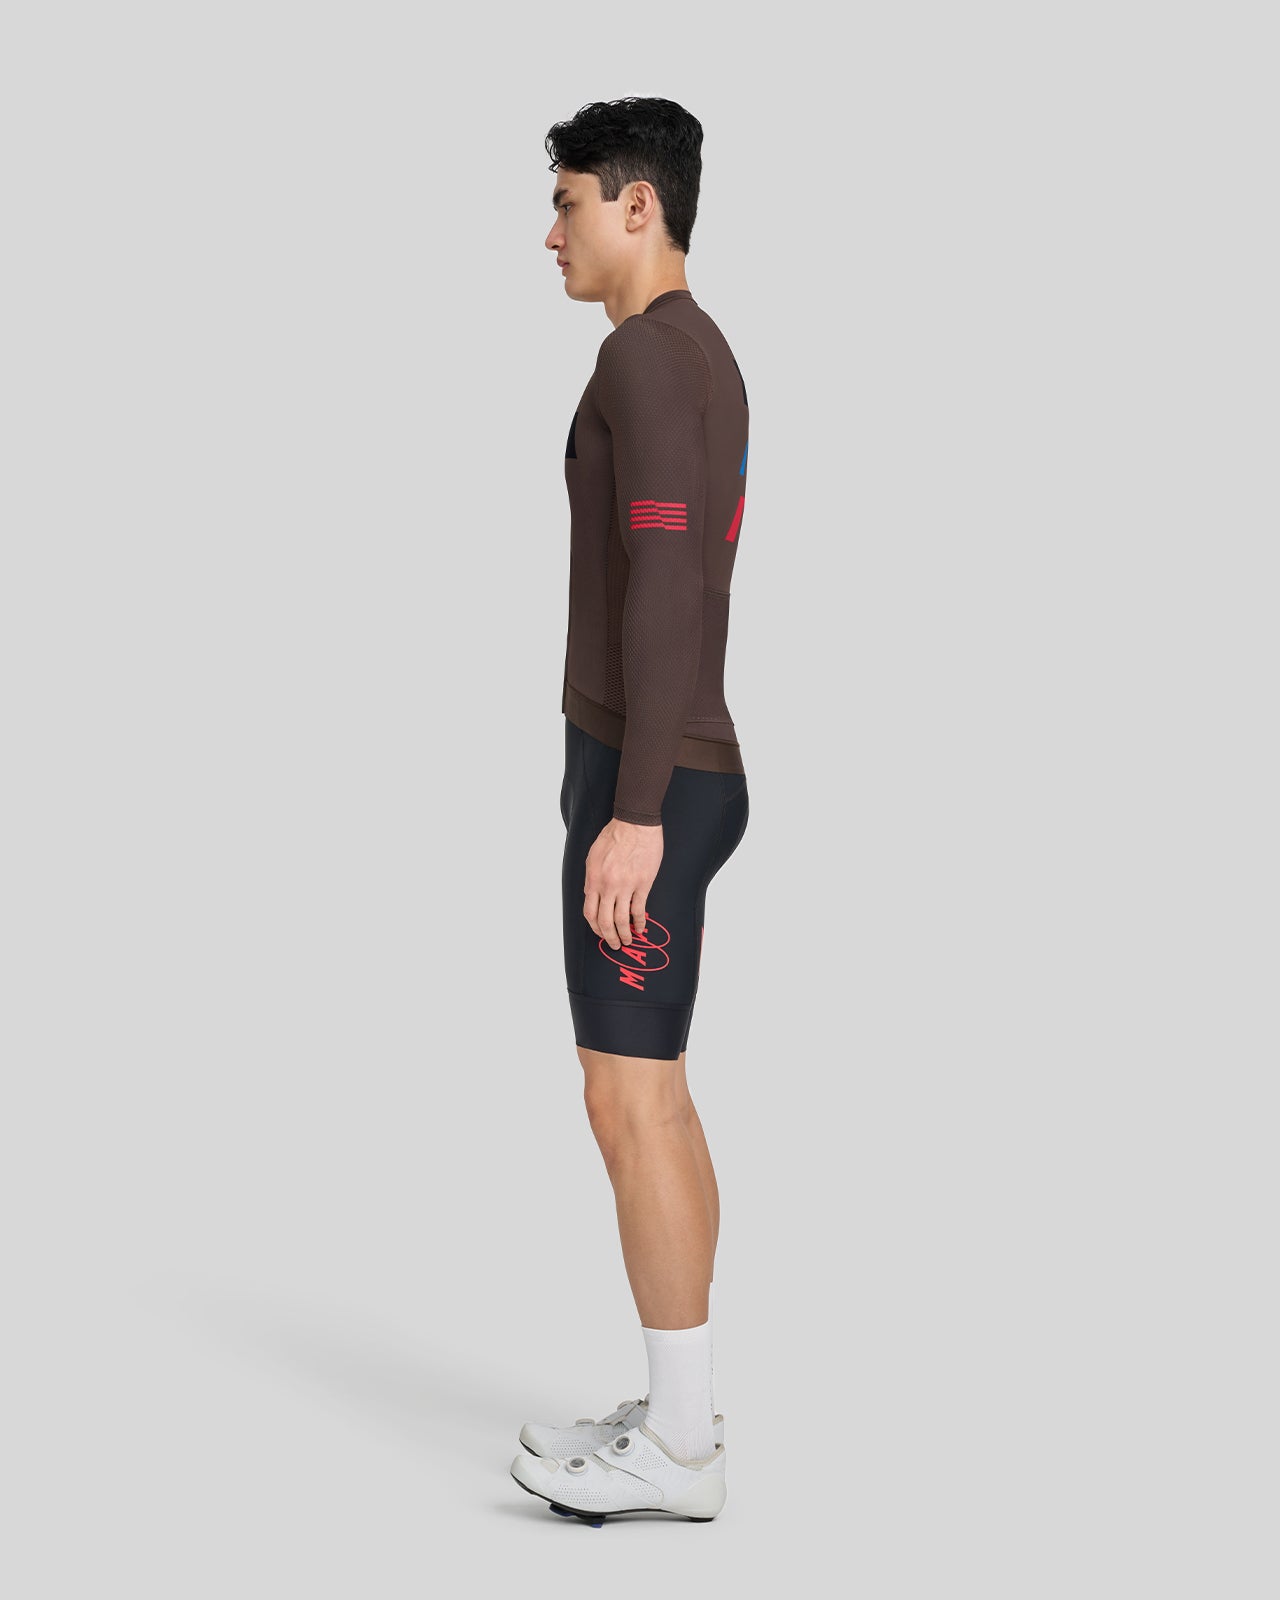 Trace Pro Air LS Jersey - MAAP Cycling Apparel